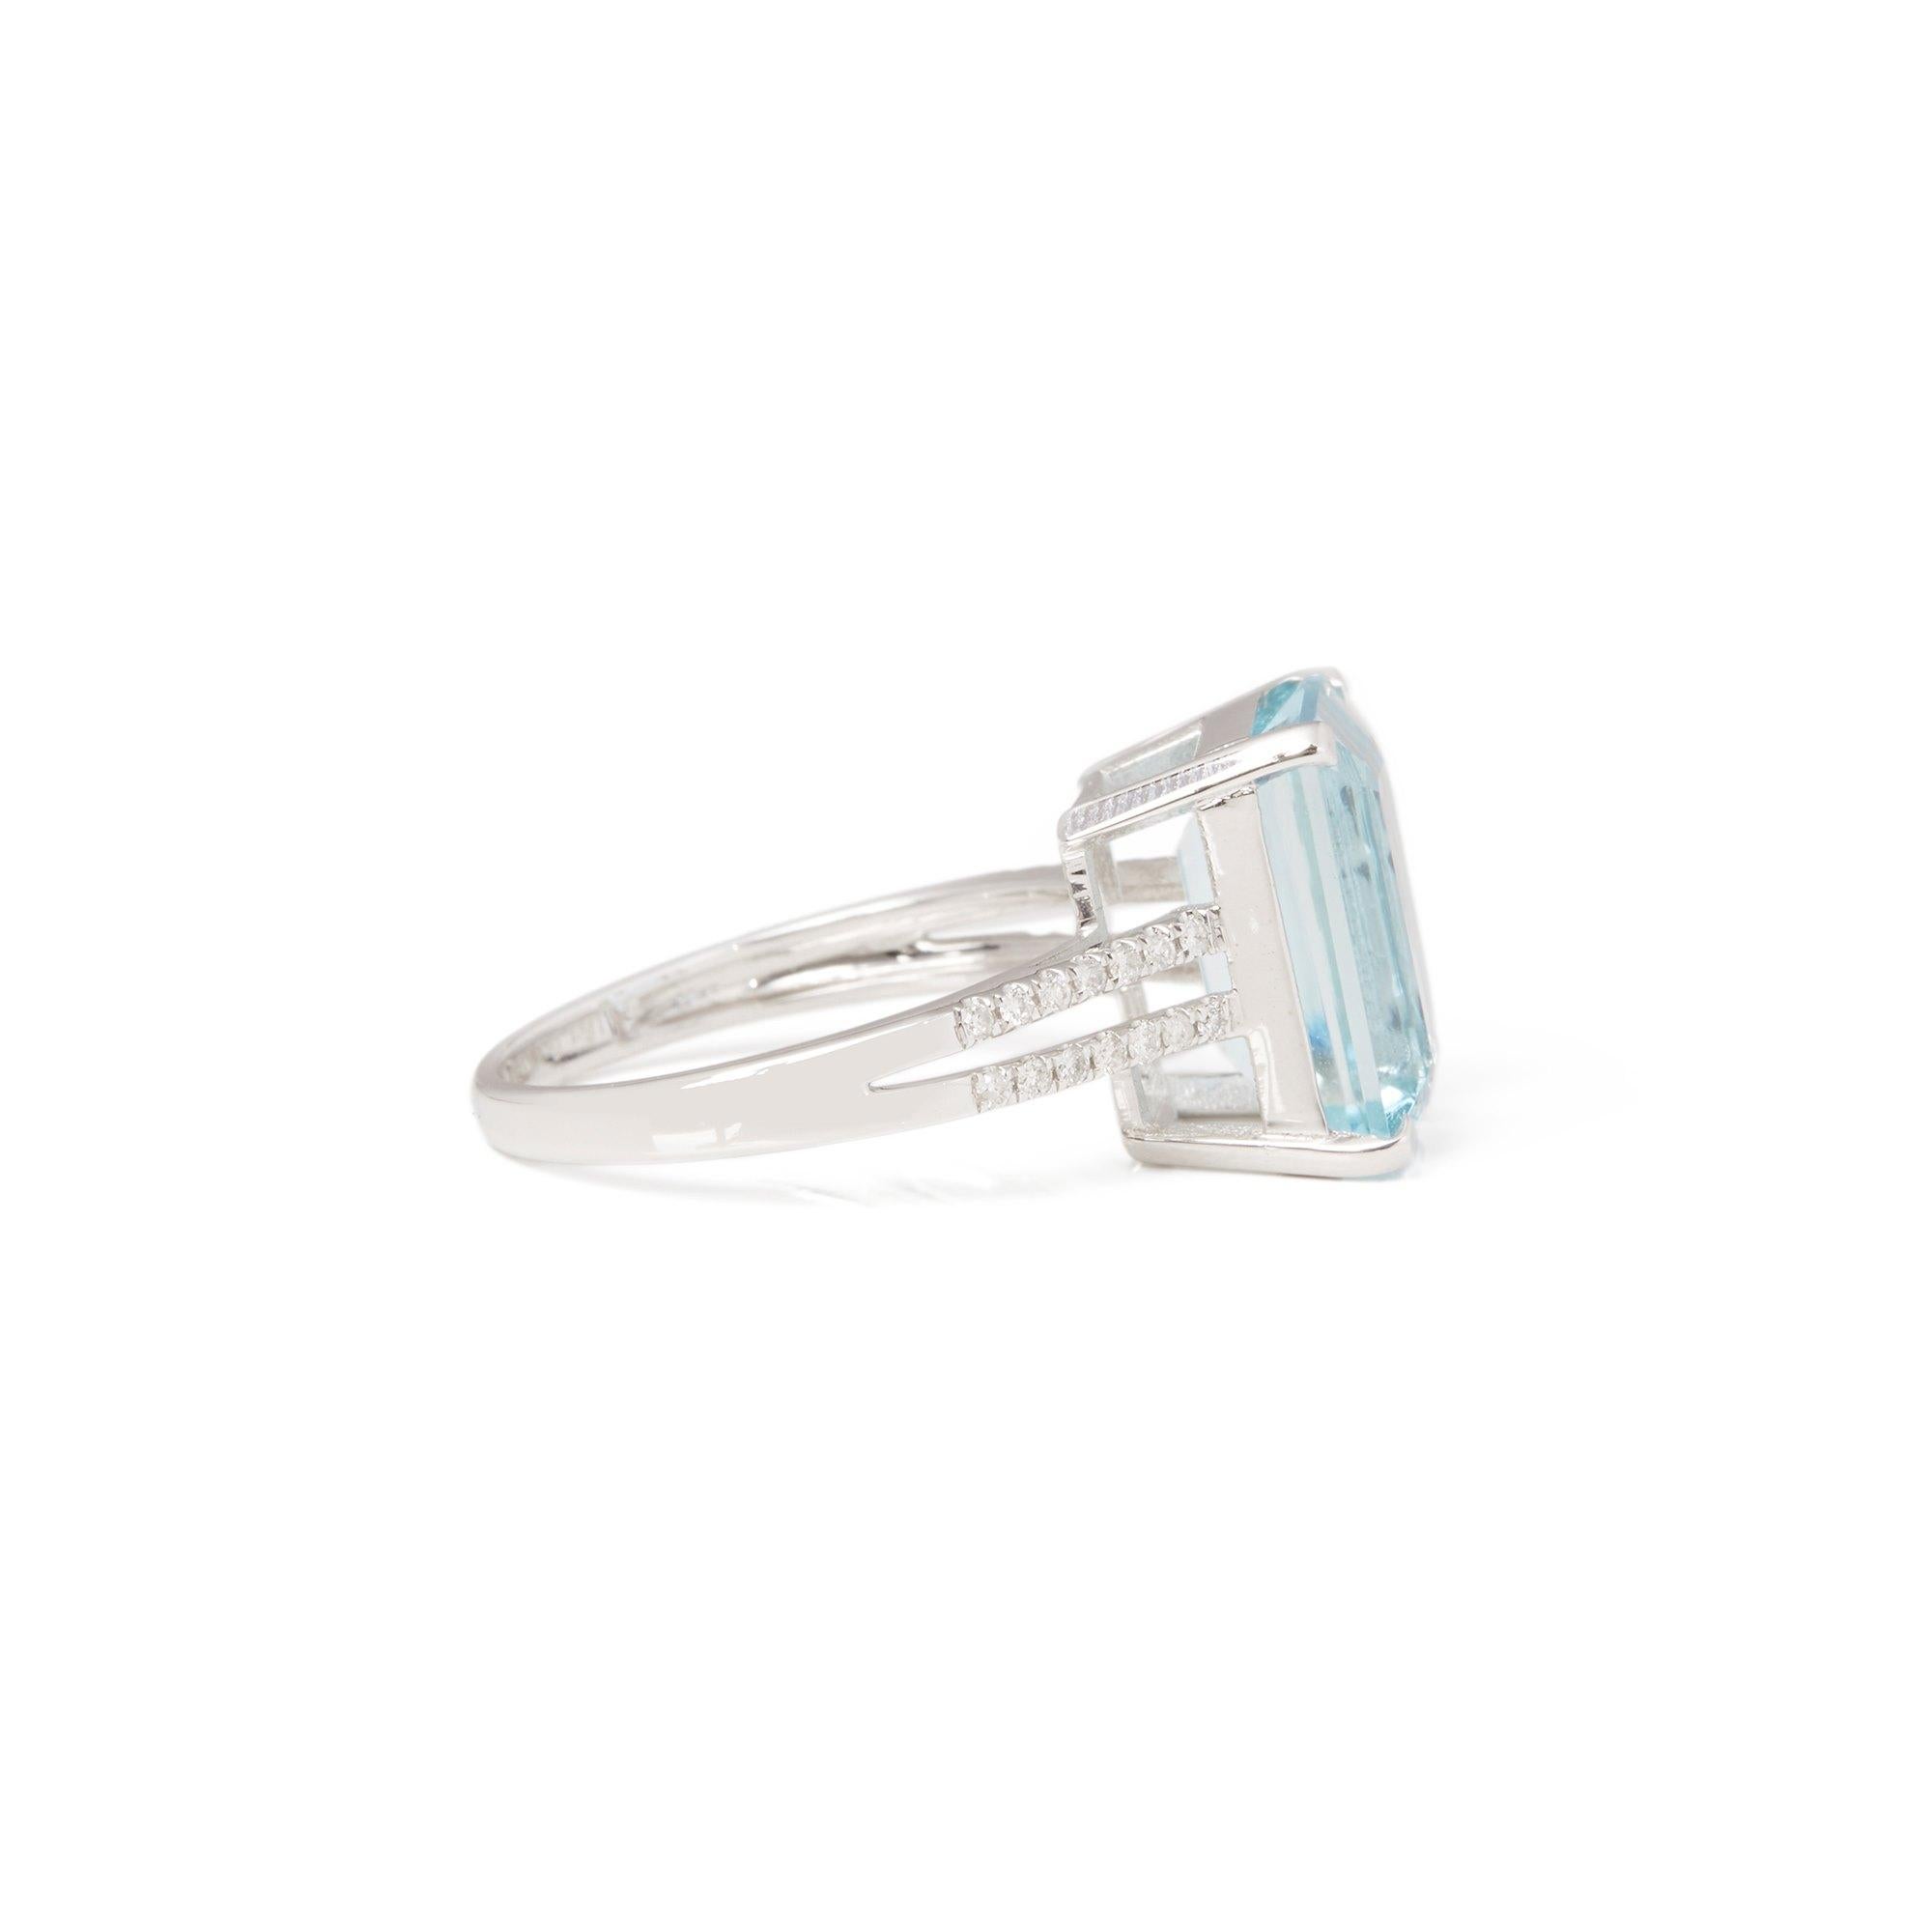 Certified 5.22ct Emerald Cut Aquamarine and Diamond 18ct Gold Ring In Excellent Condition For Sale In Bishop's Stortford, Hertfordshire